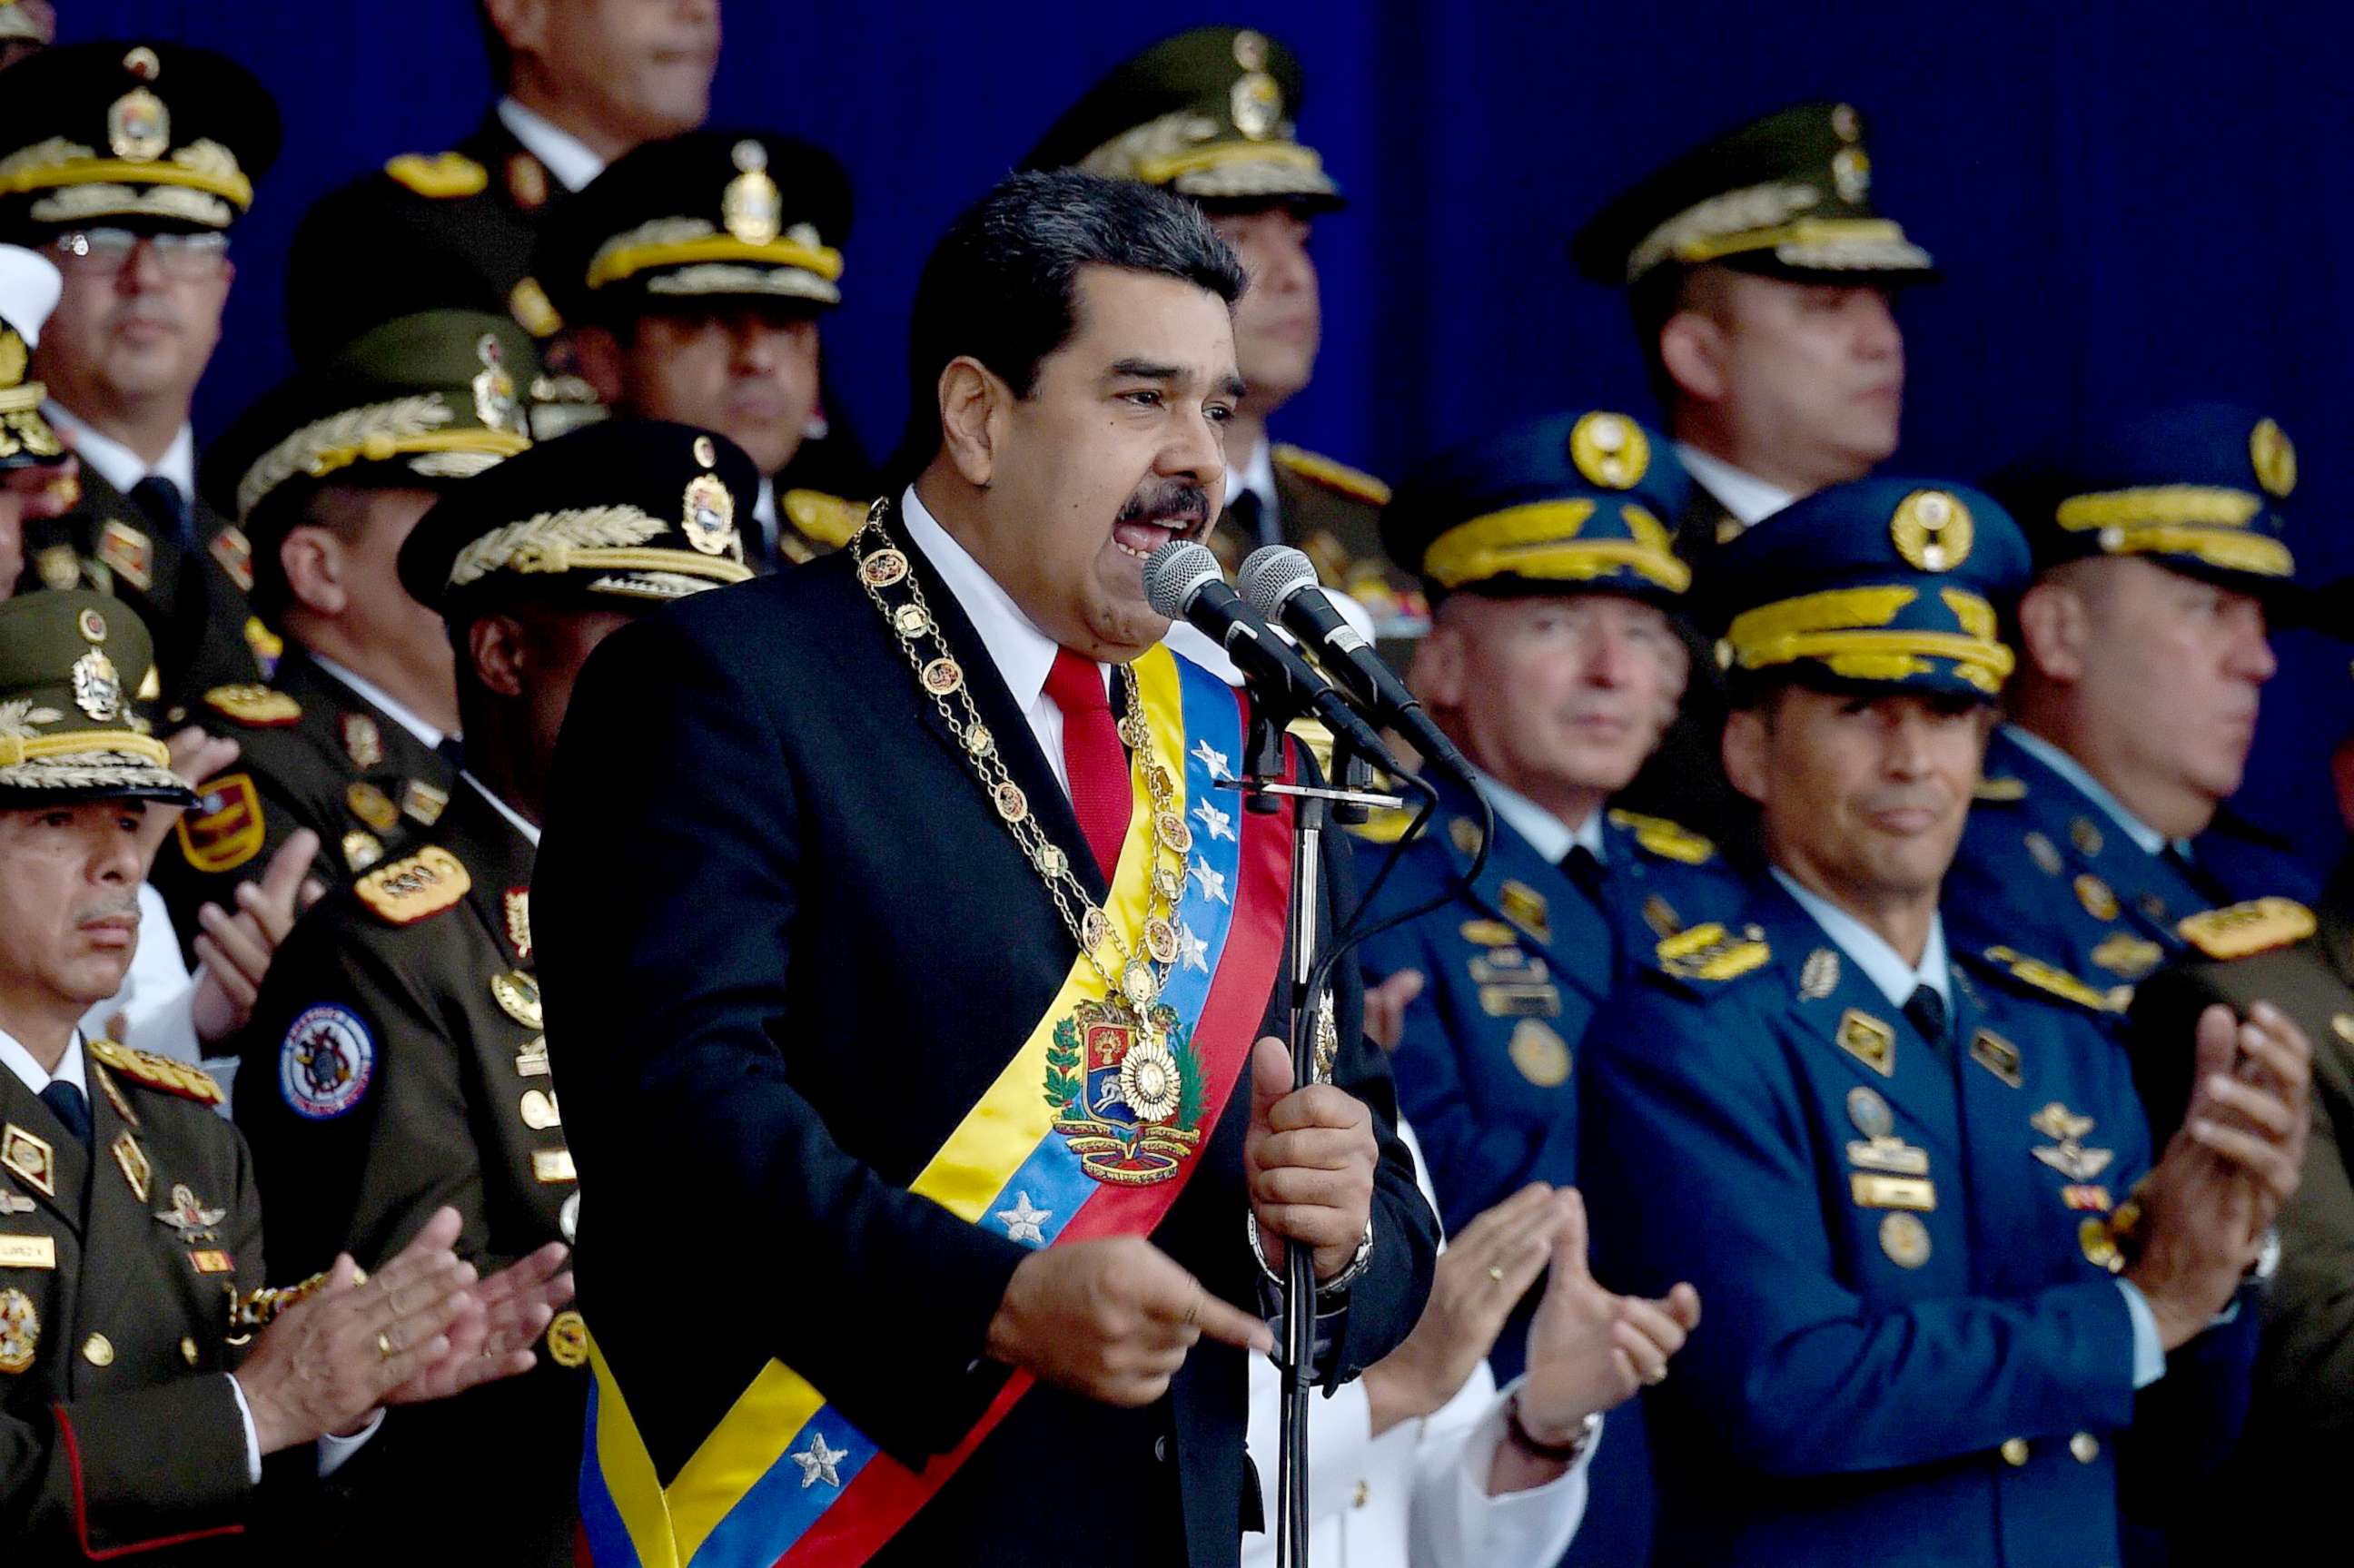 PHOTO: Venezuelan President Nicolas Maduro delivers a speech during a ceremony in support of the National Guard in Caracas on August 4, 2018.